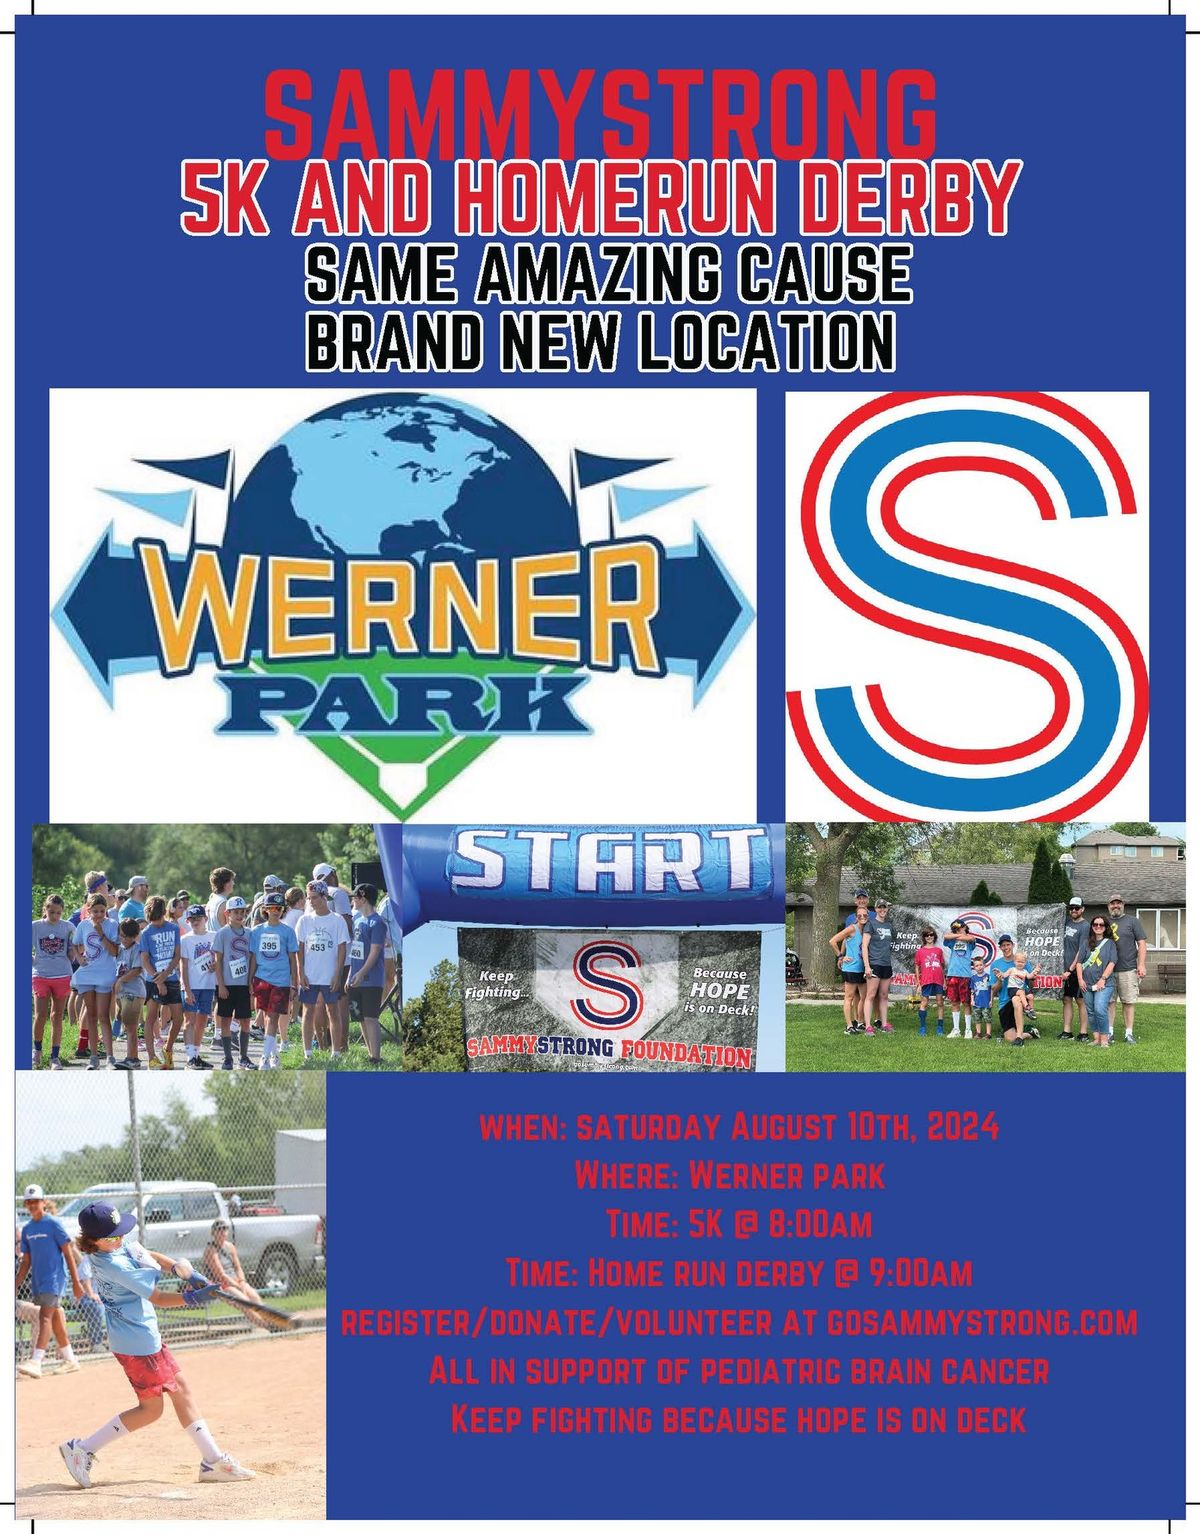 4th Annual SammyStrong 5k and Homerun Derby